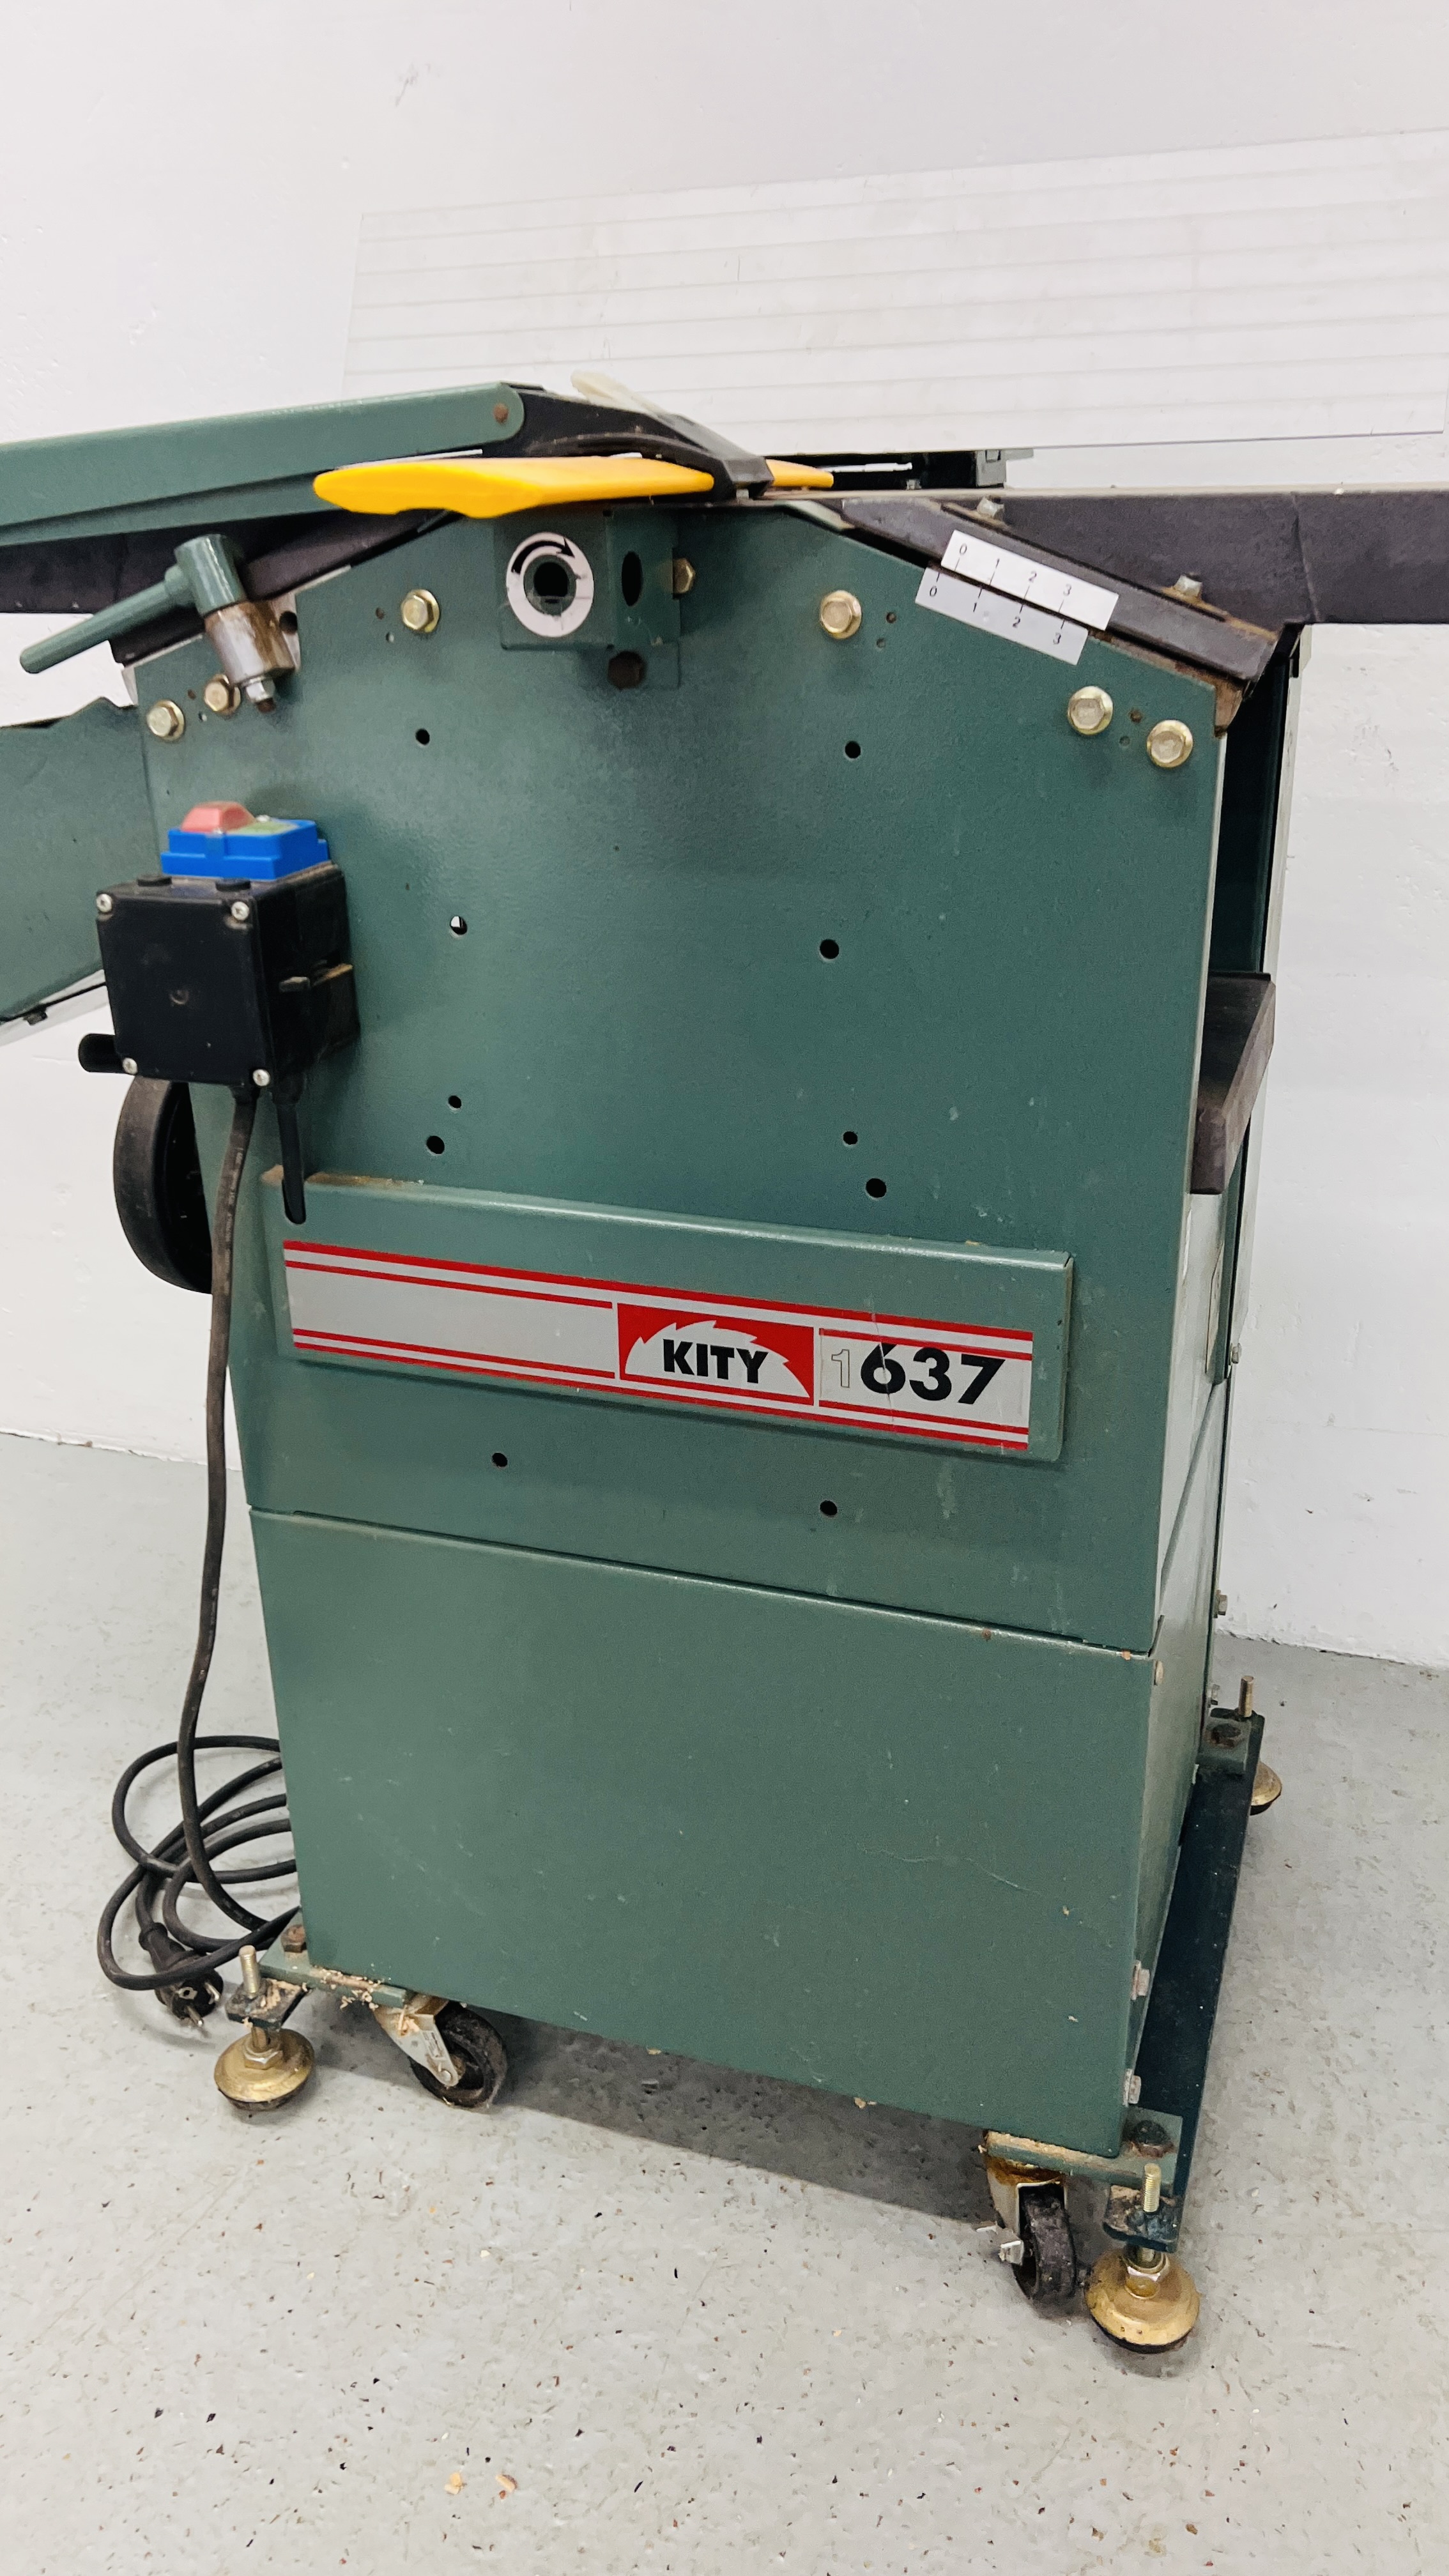 KITY 1637 PLANER THICKNESSER - SOLD AS SEEN. - Image 2 of 12